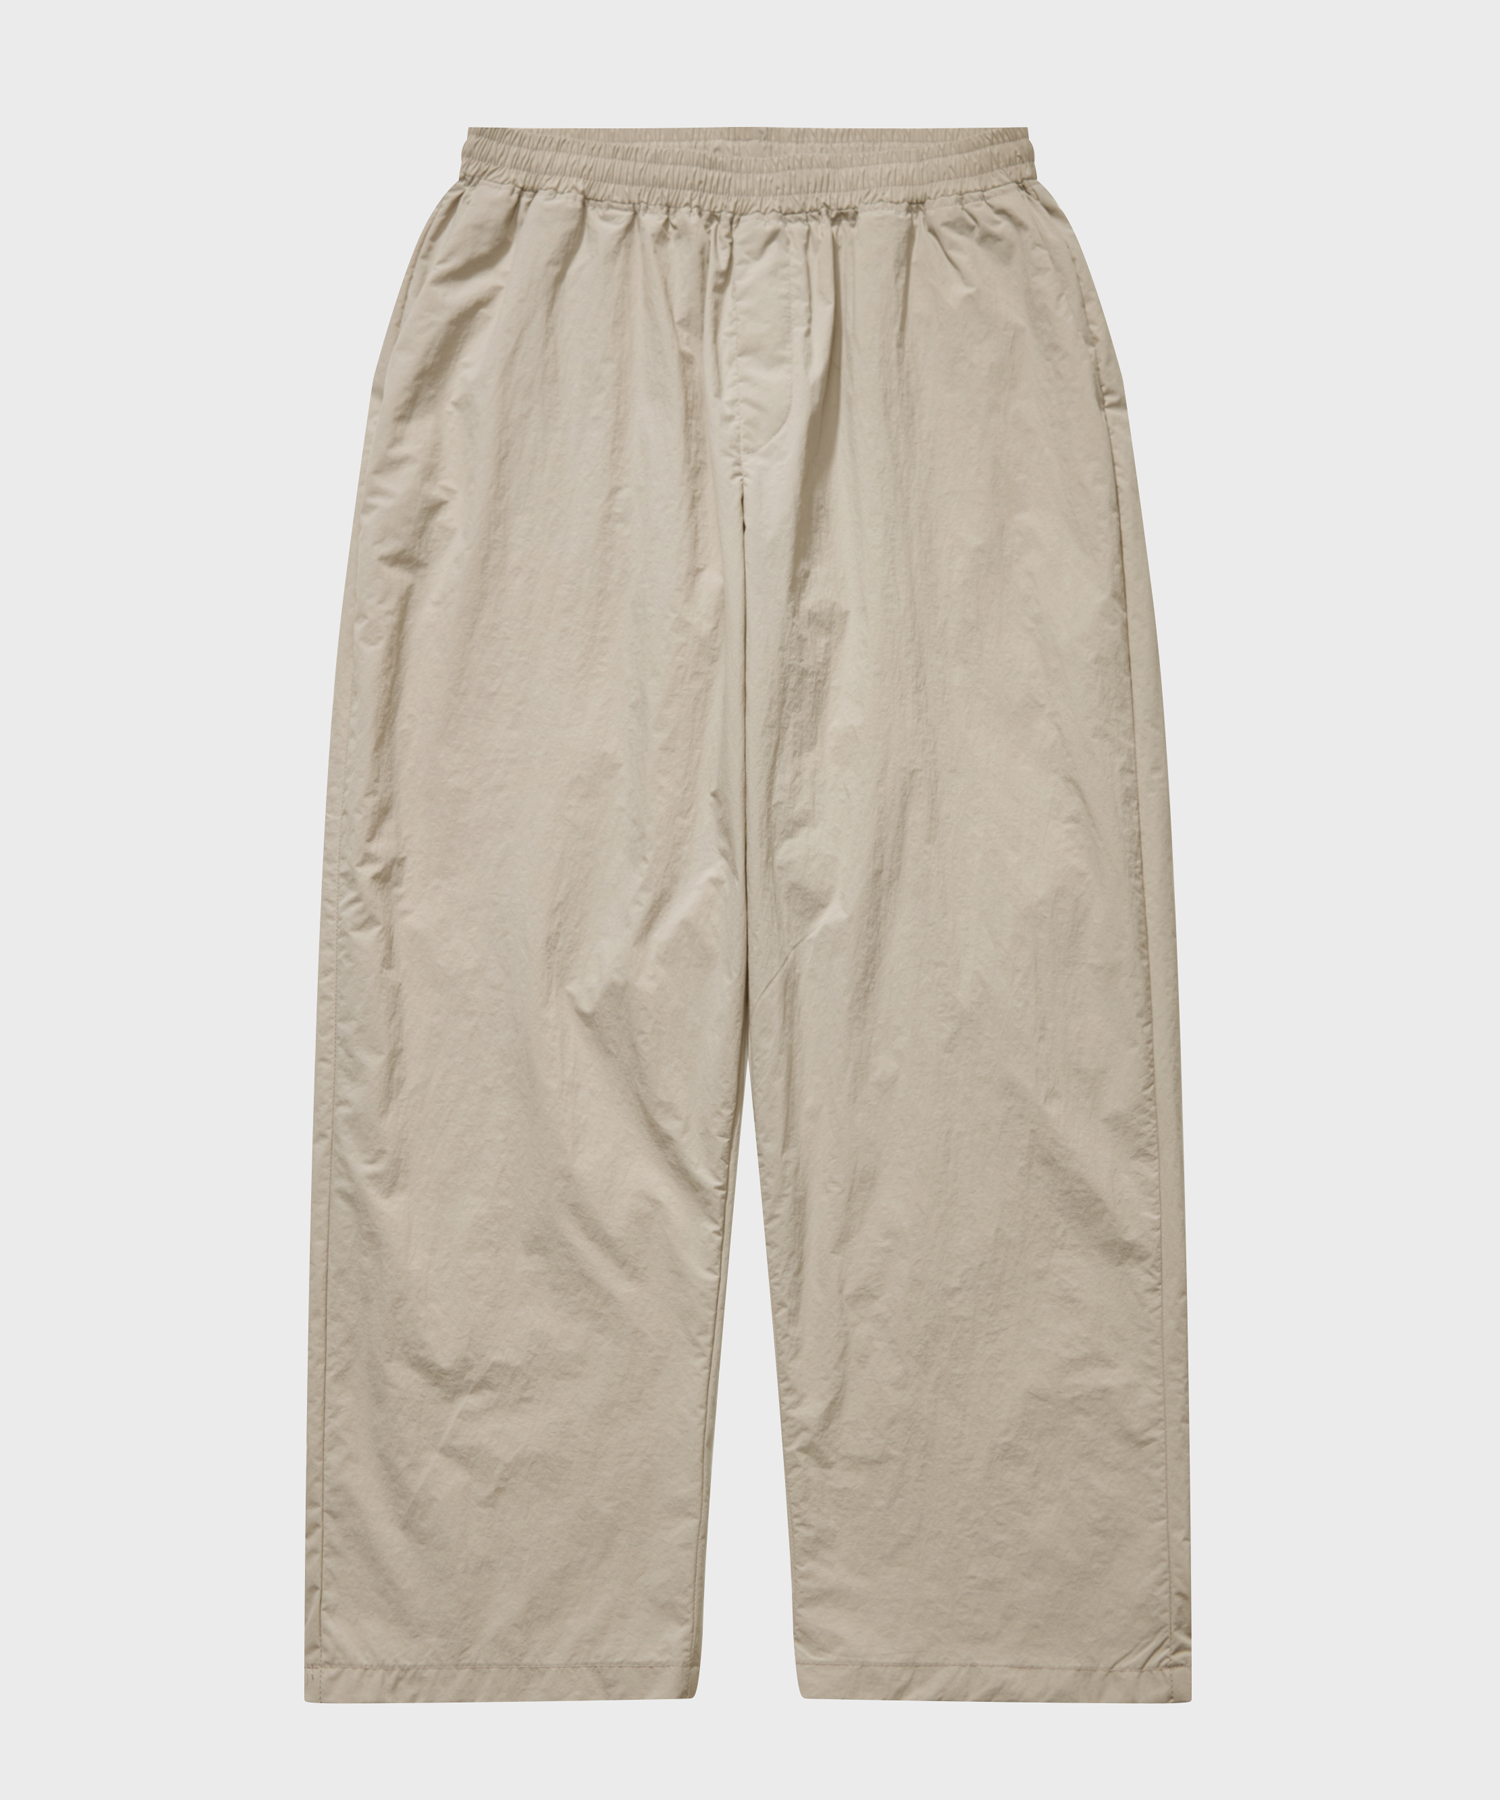 SUMMER office casual sports banding pants_Sand